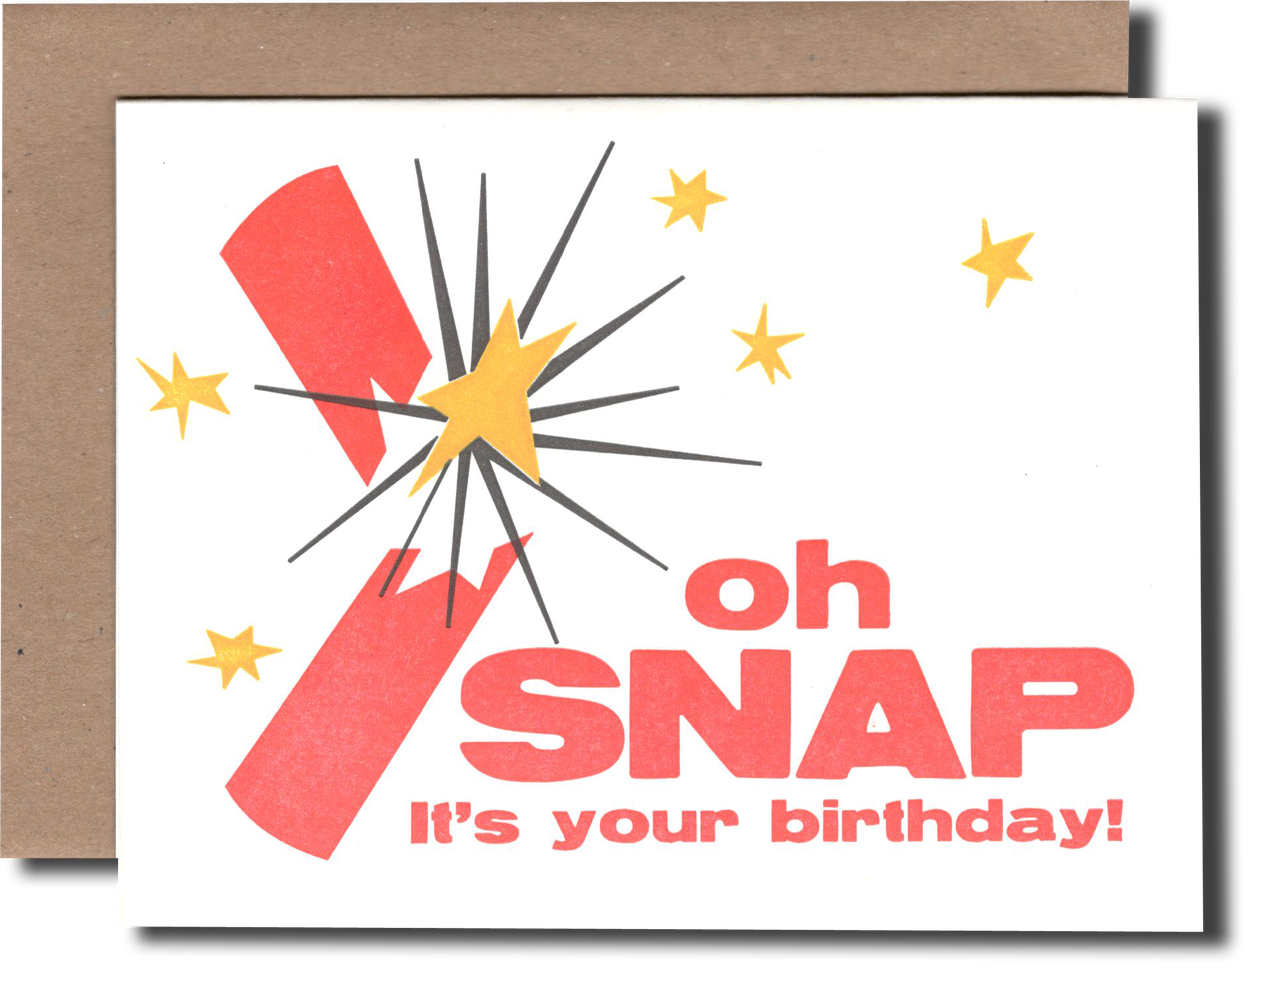 Power and Light Press - Oh Snap Birthday